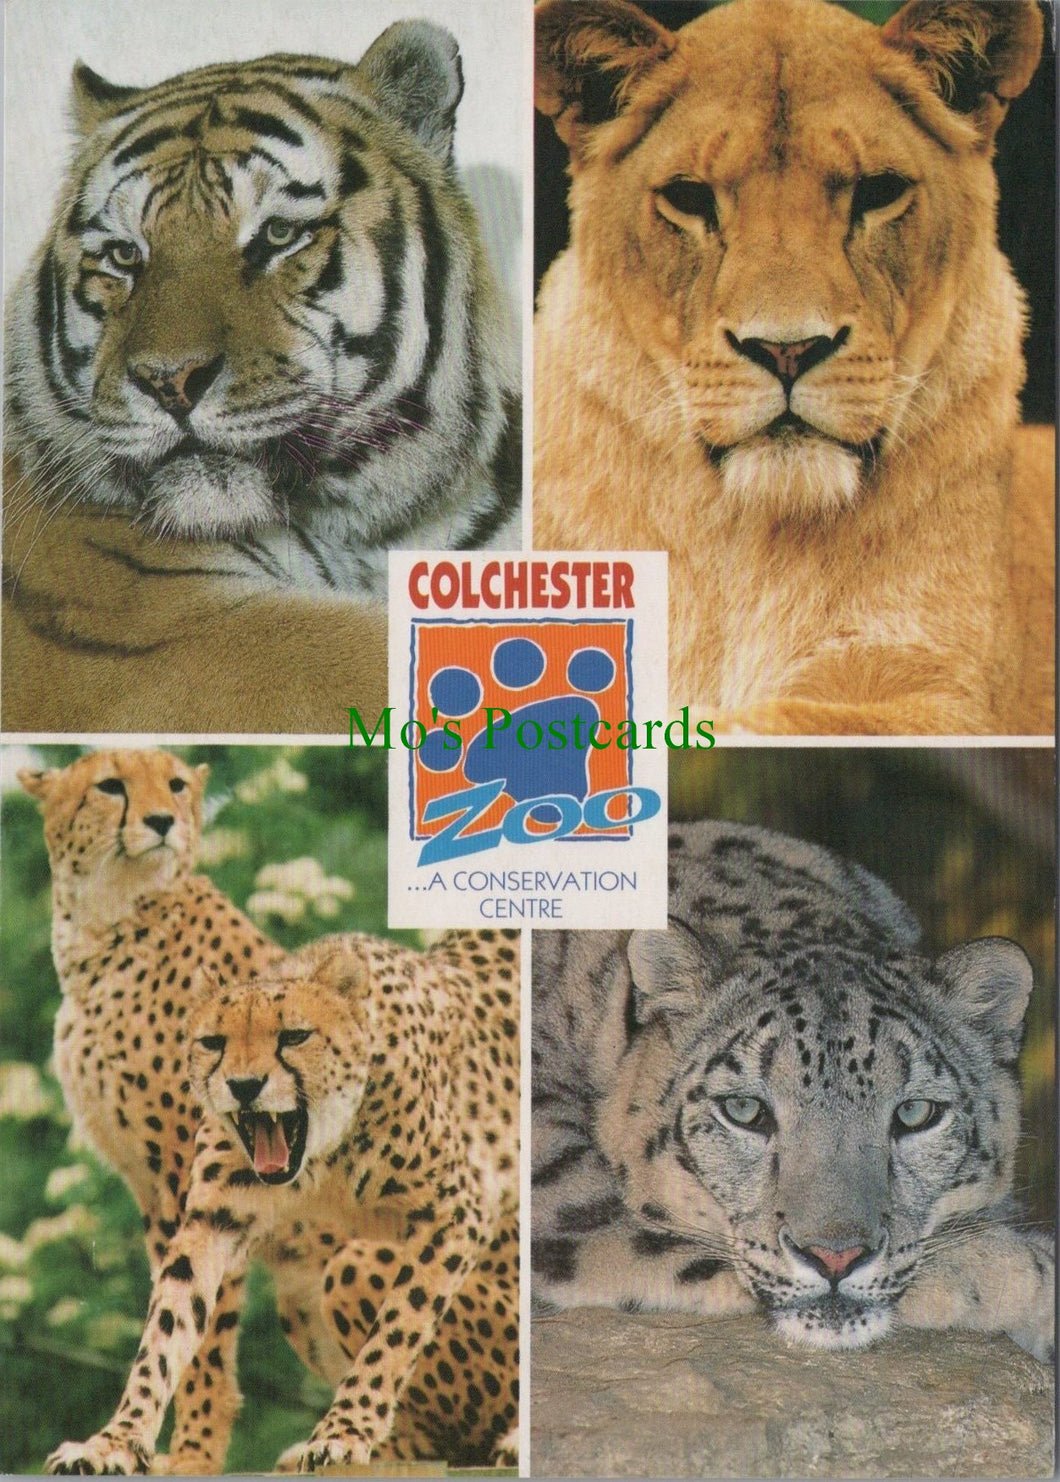 Big cats at Colchester Zoo